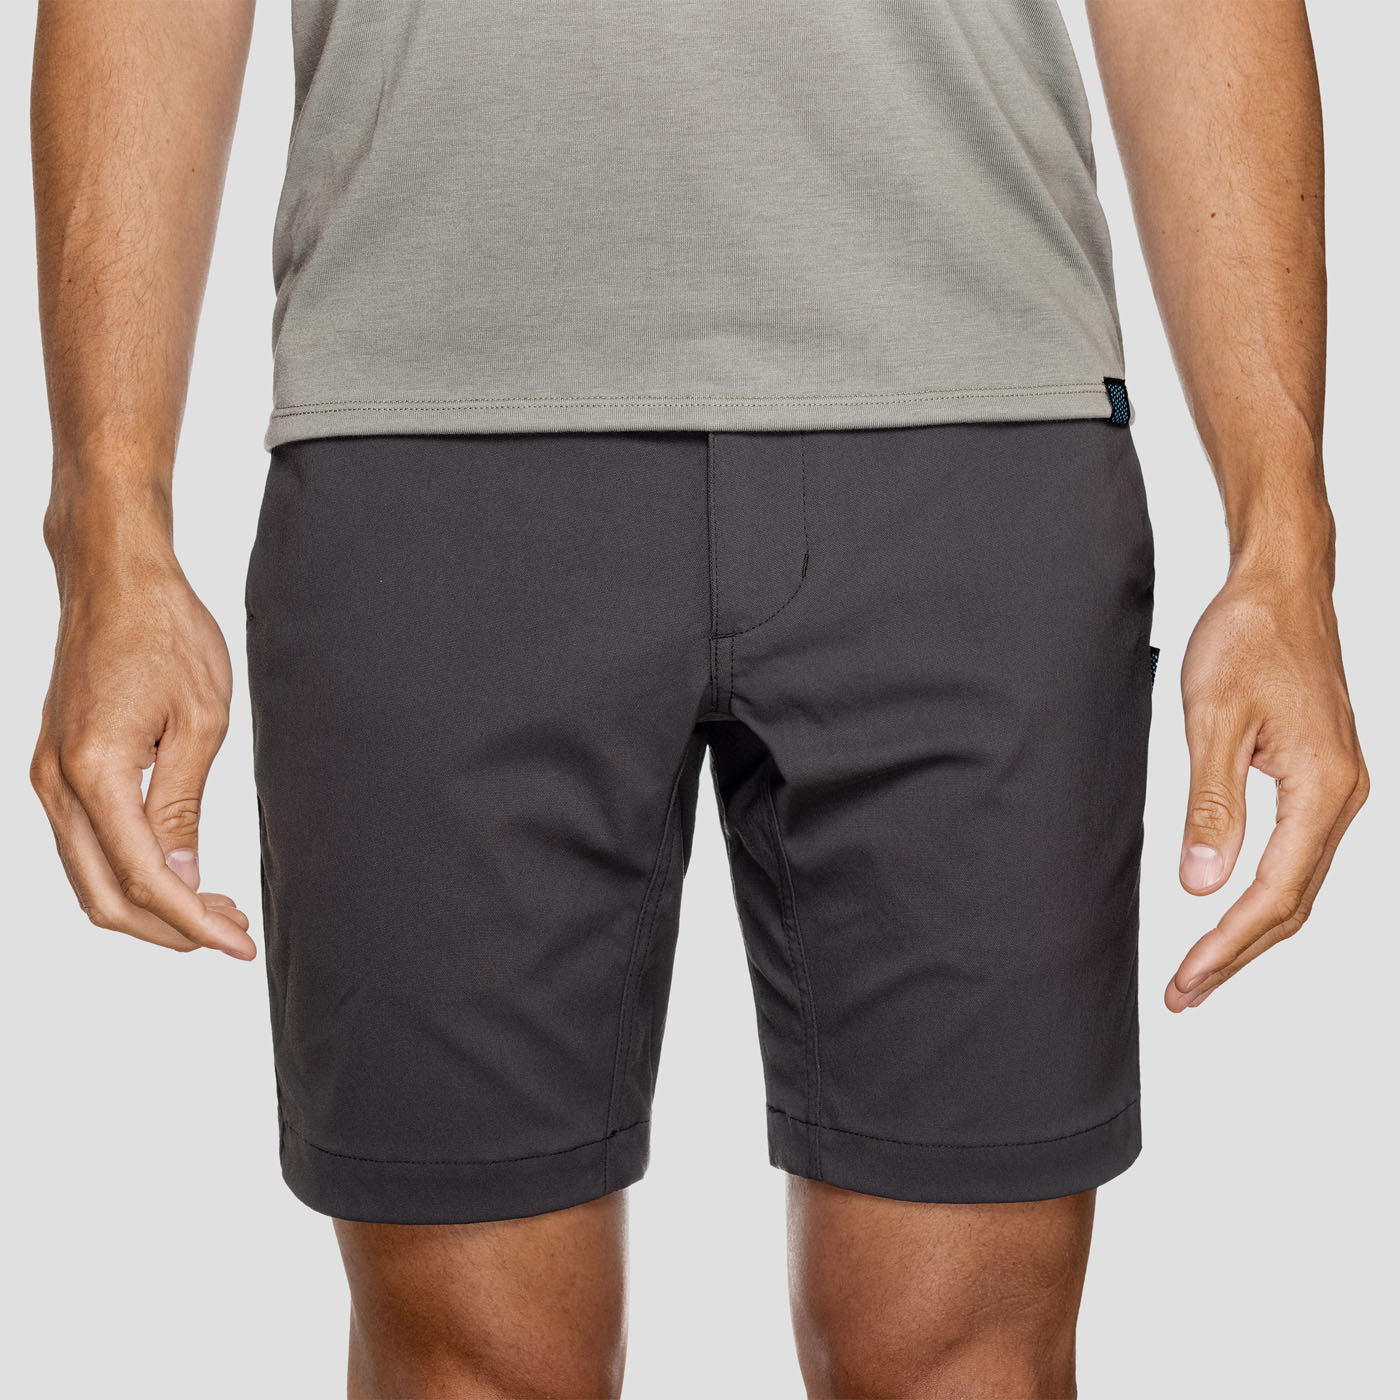 Ruilhandel Hollywood risico Mission Shorts – Ornot Online Store